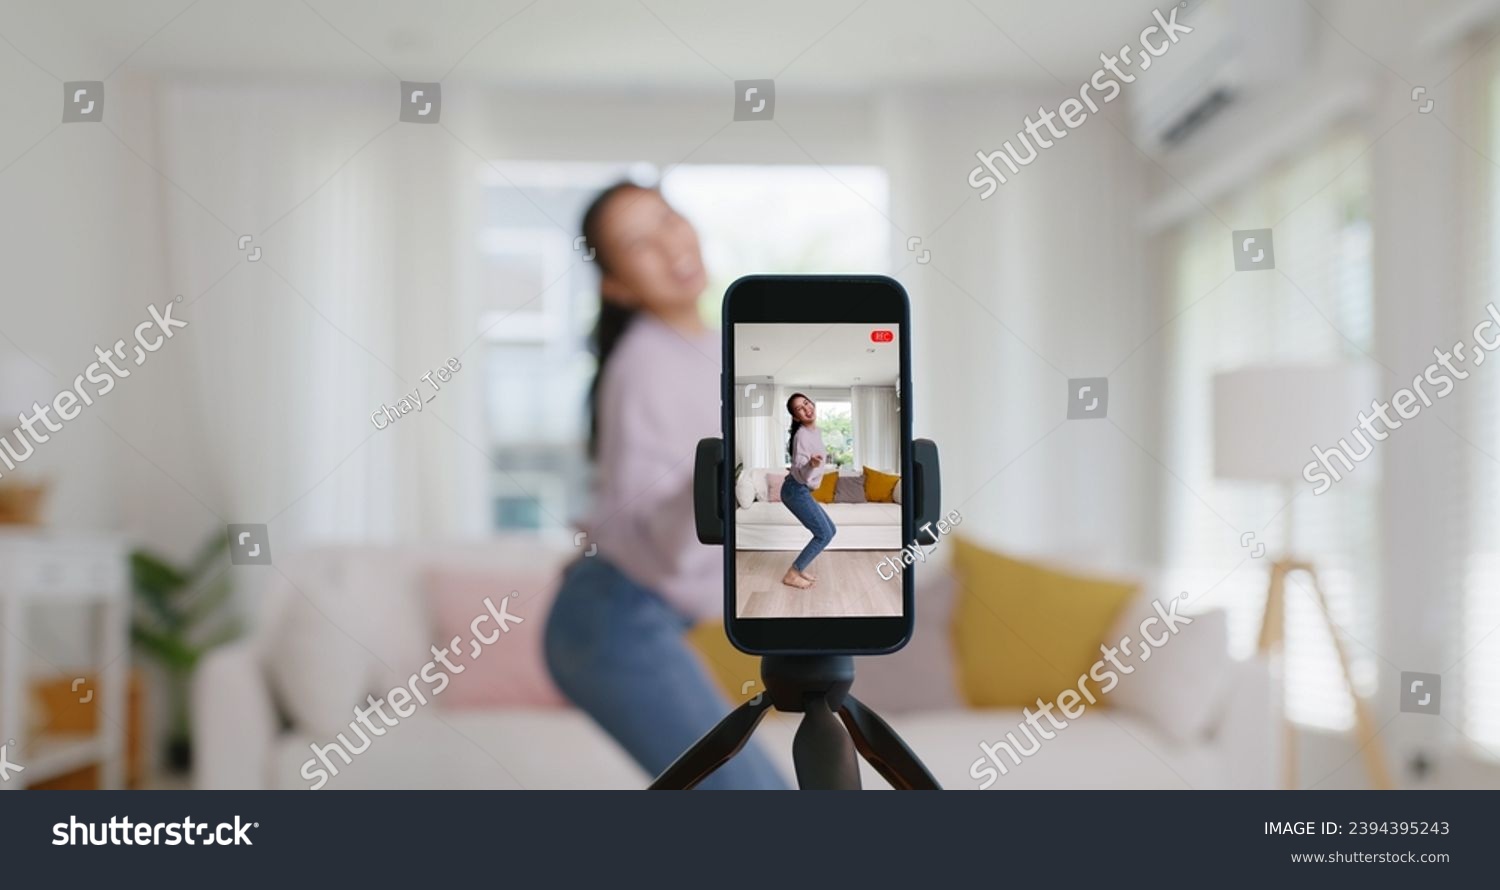 Asia vlogger woman influencer smile enjoy hobby happy fun live online screen  reel  at home Gen Z teen girl talent people play video selfie camera shoot  app show share viral story #2394395243